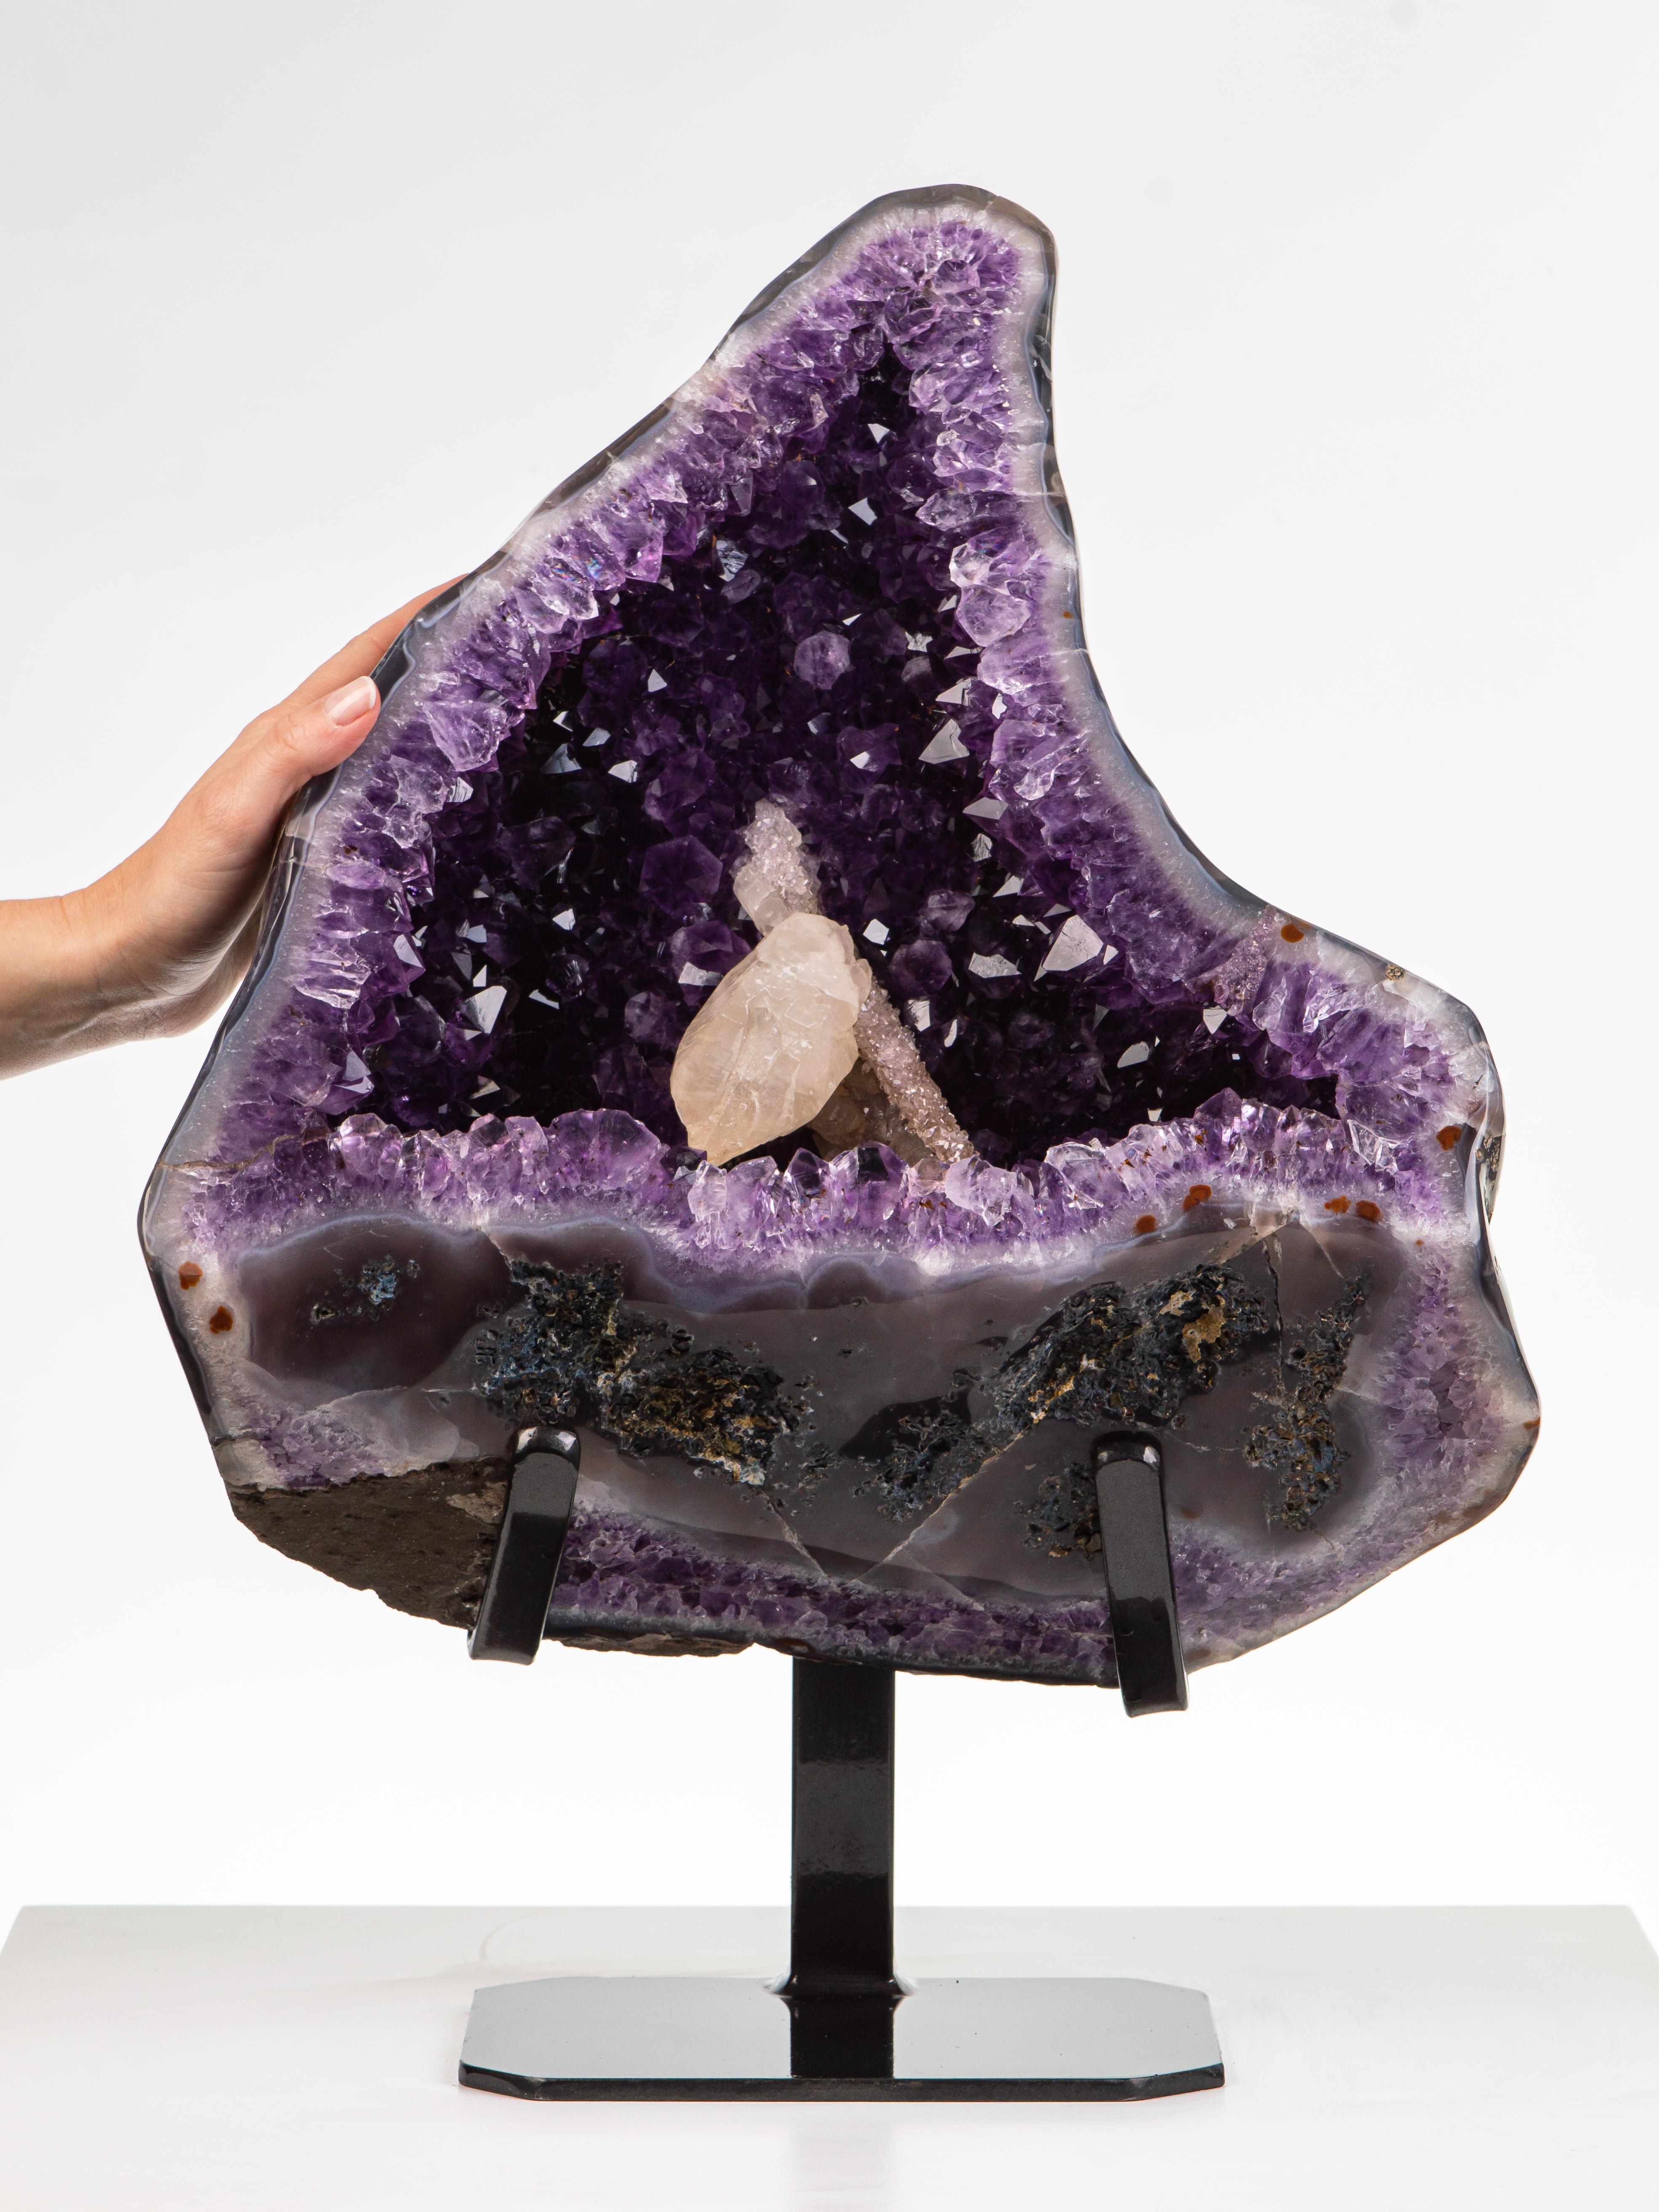 A half polished geode with a thick agatised border. The inside covered by deep purple amethyst crystals and 2 beautiful calcite formations at the centre, one of them covered with a blanket of druze.

This piece was legally and ethically sourced